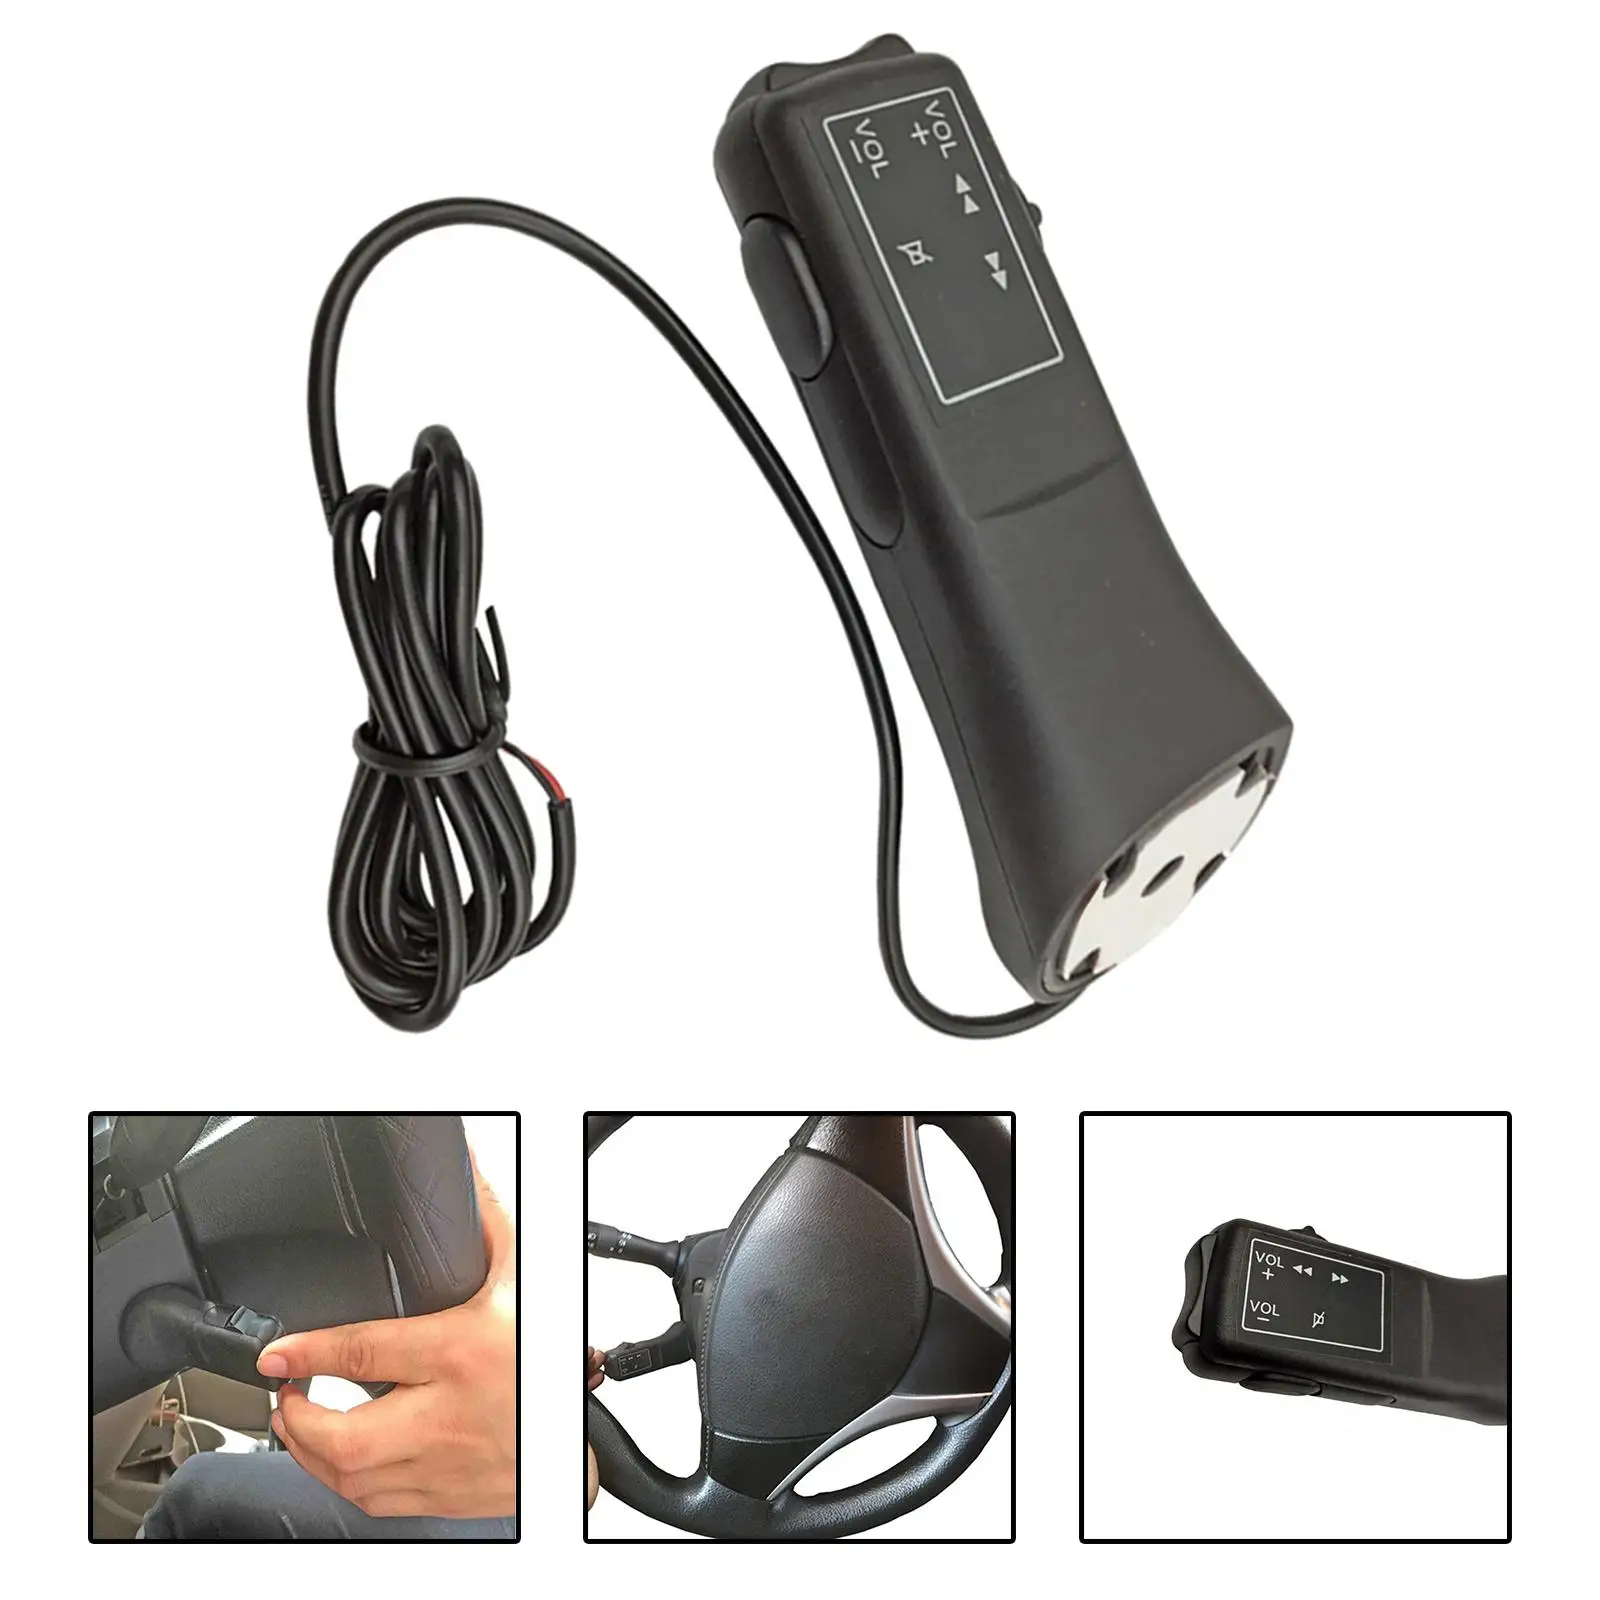 Car Radio Wired Controller Practical Fit for Car Radio Direct Replaces Car